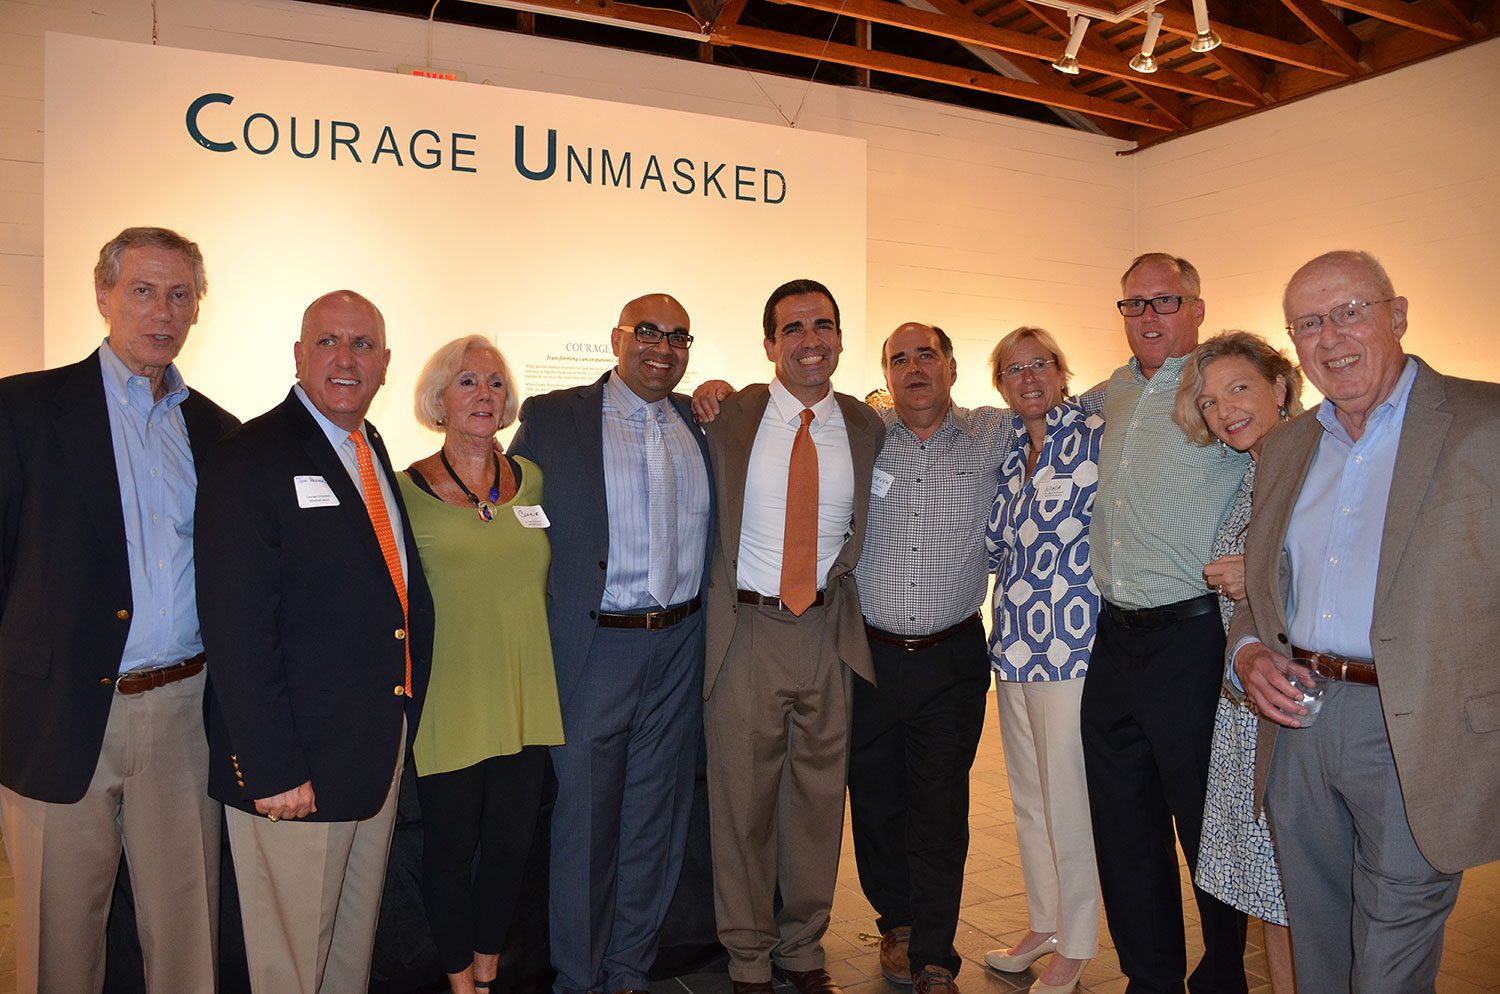 Rehoboth Beach Courage Unmasked (CURB) September 2015